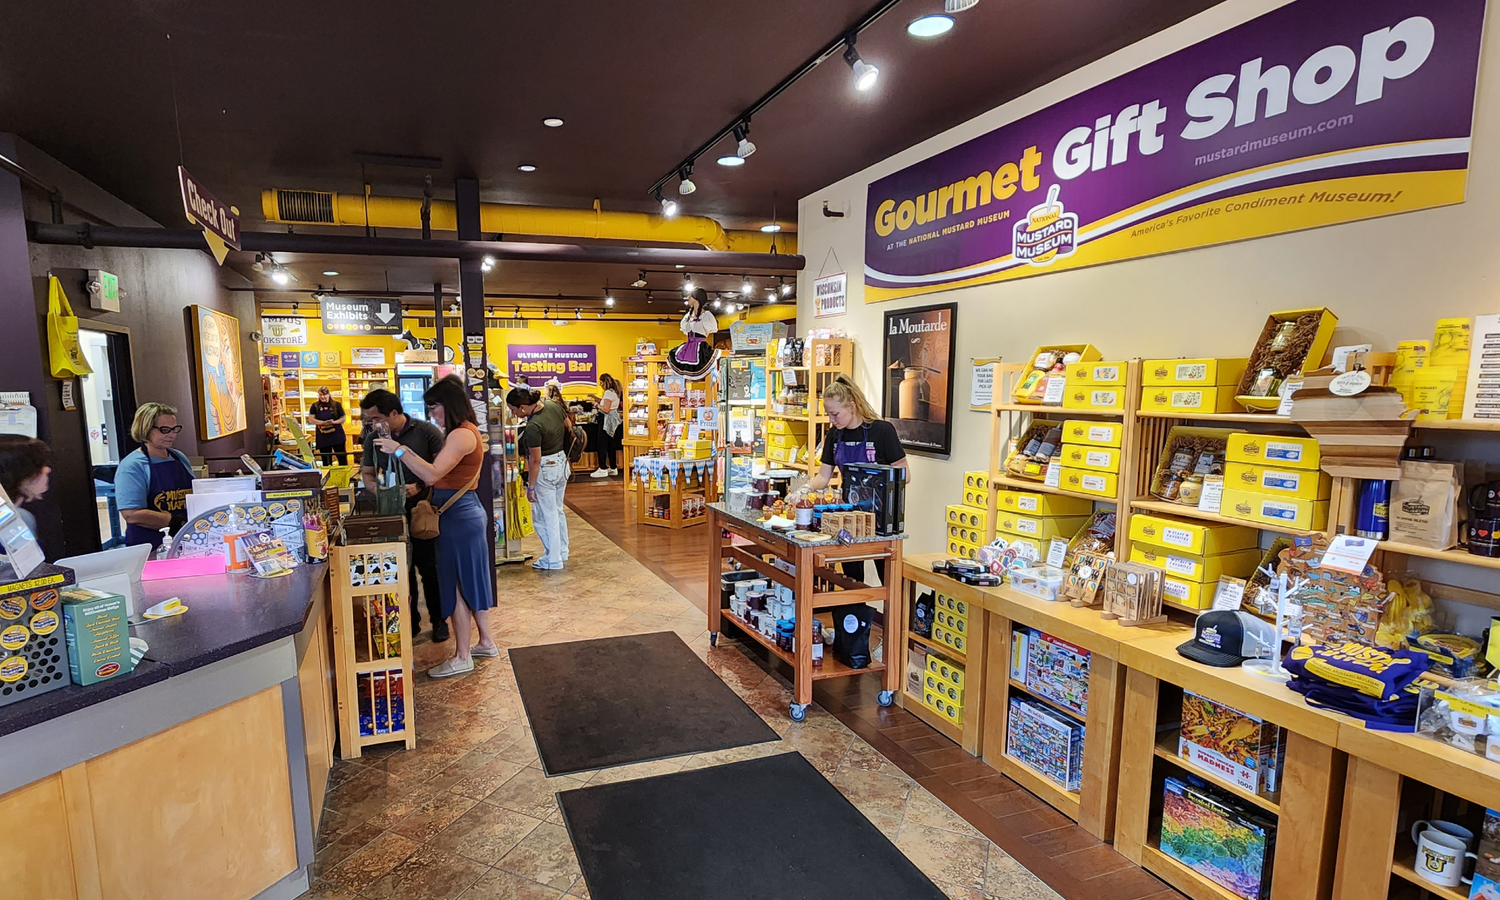 The Gourmet Gift Shop